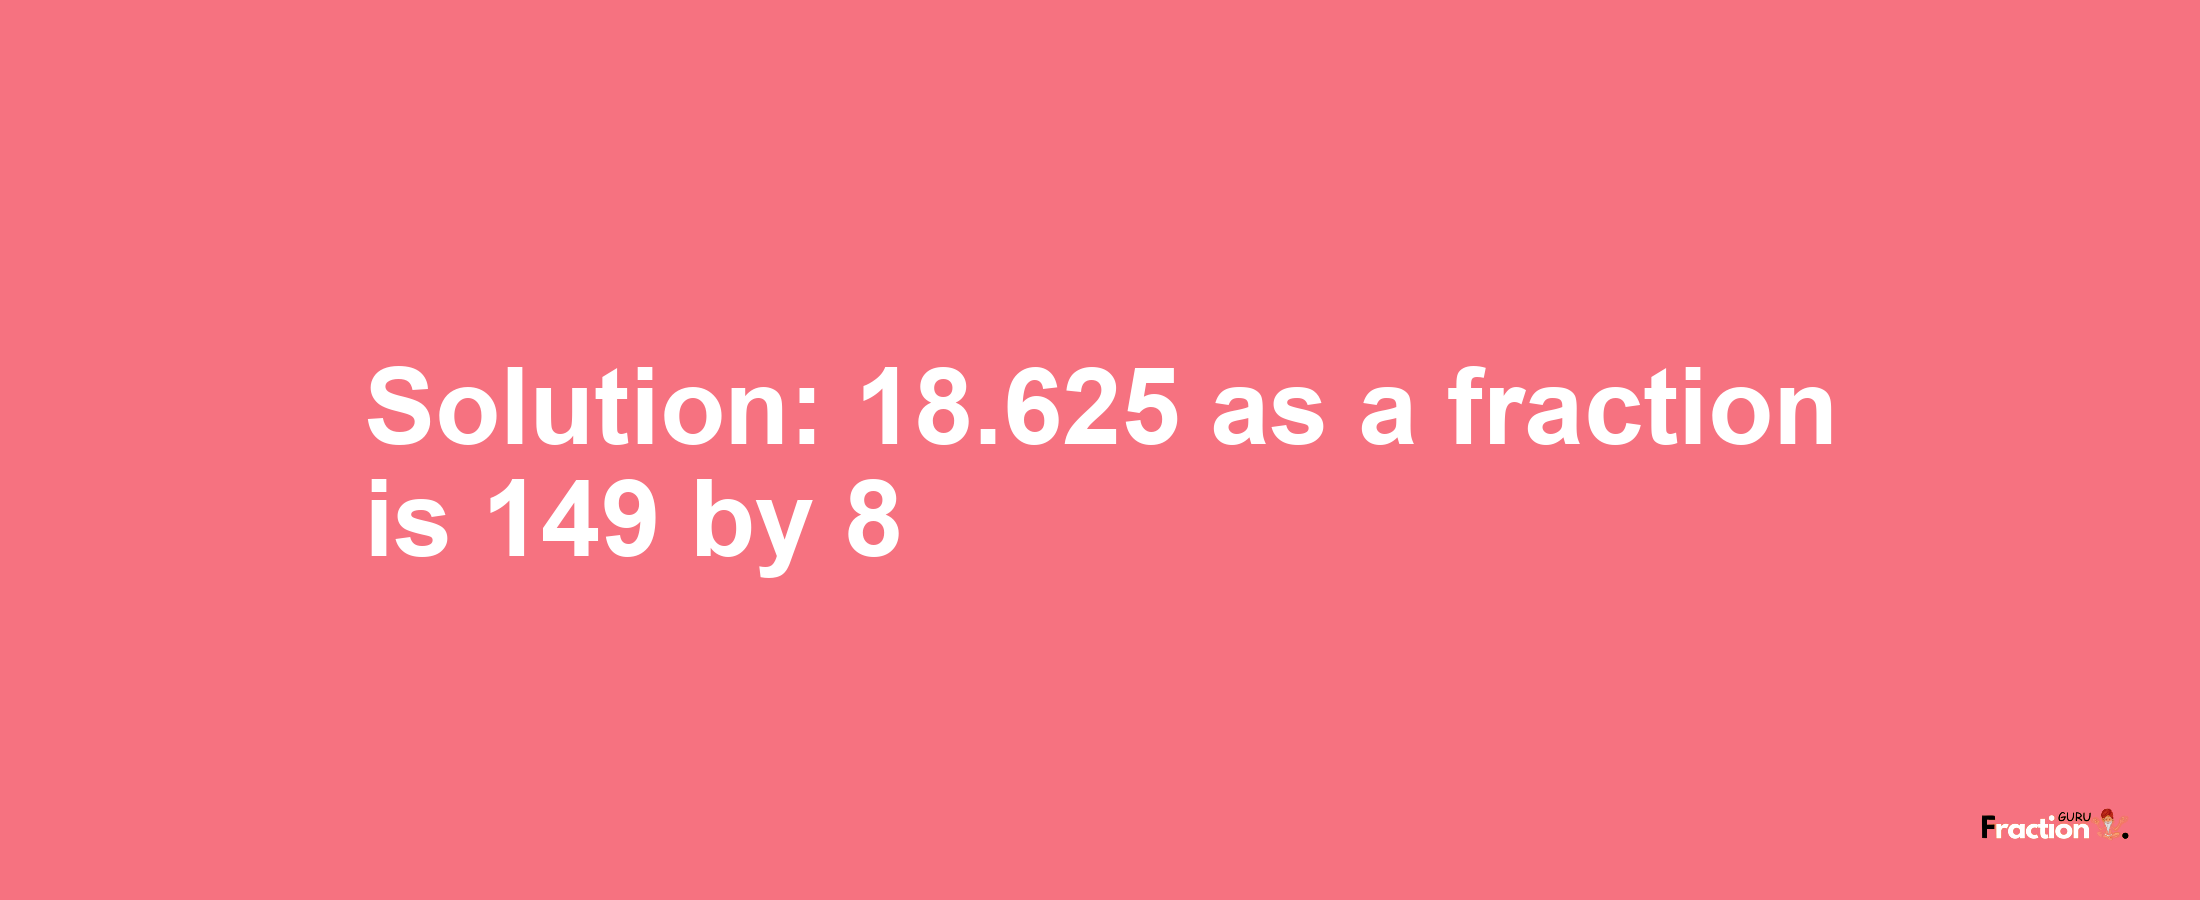 Solution:18.625 as a fraction is 149/8